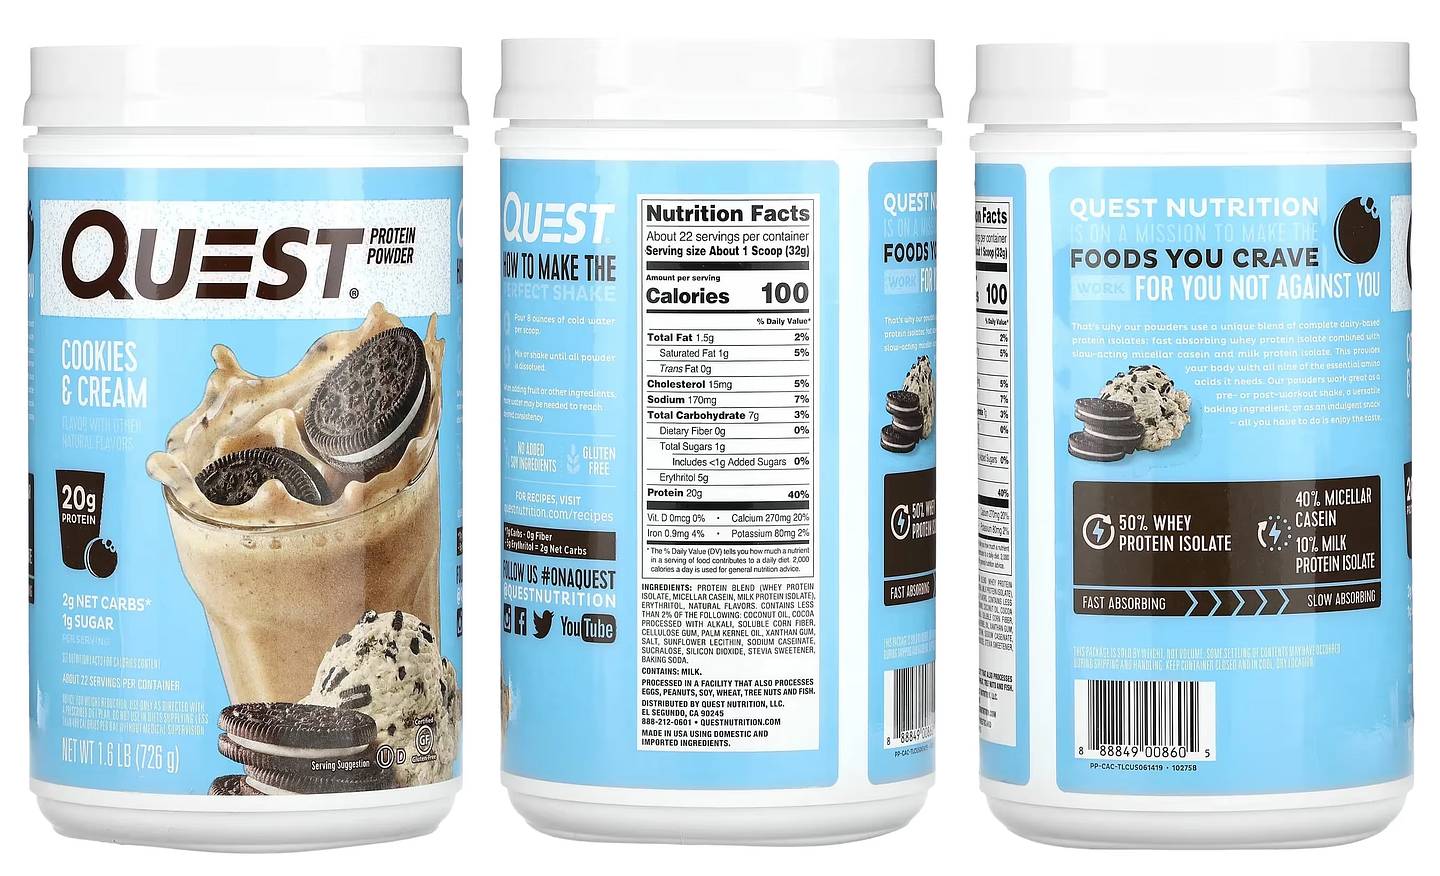 Quest Nutrition, Protein Powder, Cookies & Cream packaging